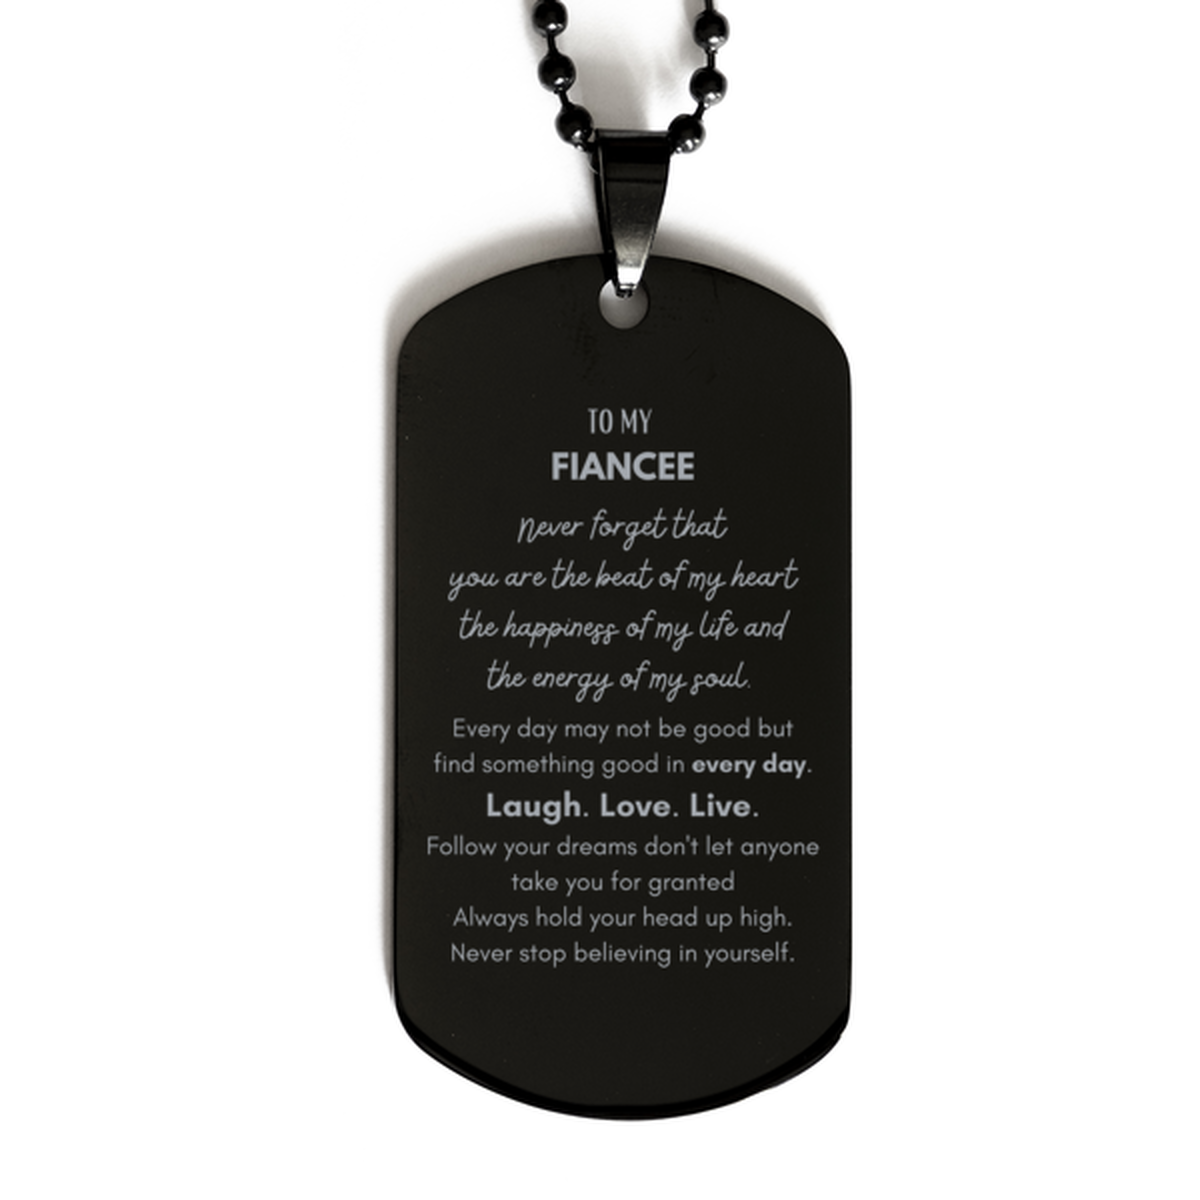 To My Fiancee Dogtag Gifts, Christmas Fiancee Black Dog Tag Present, Birthday Unique Motivational For Fiancee, To My Fiancee Never forget that you are the beat of my heart the happiness of my life and the energy of my soul